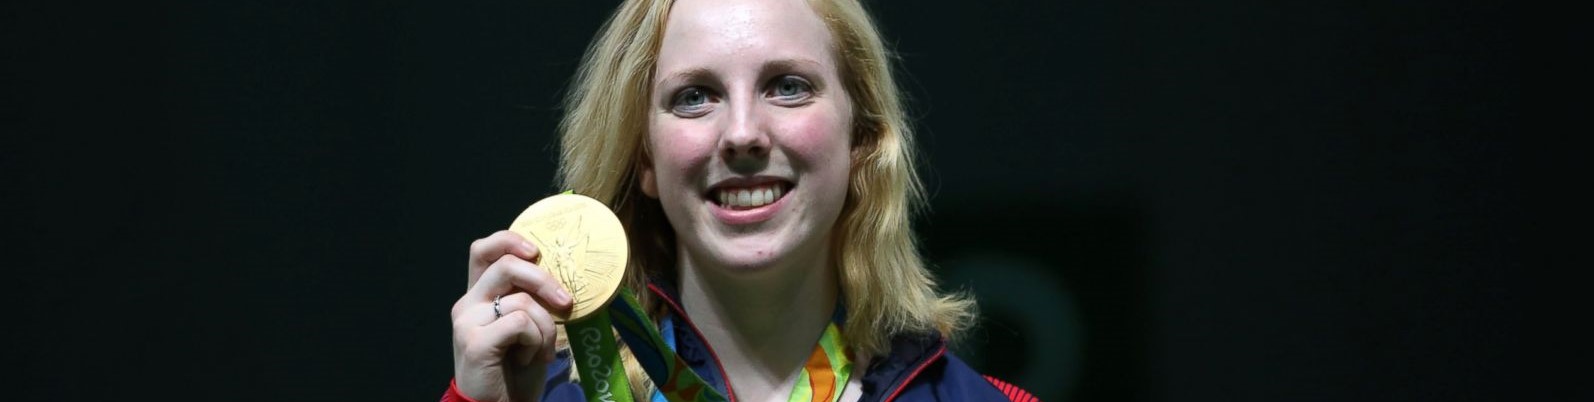 Ginny Thrasher with Olympic gold medal